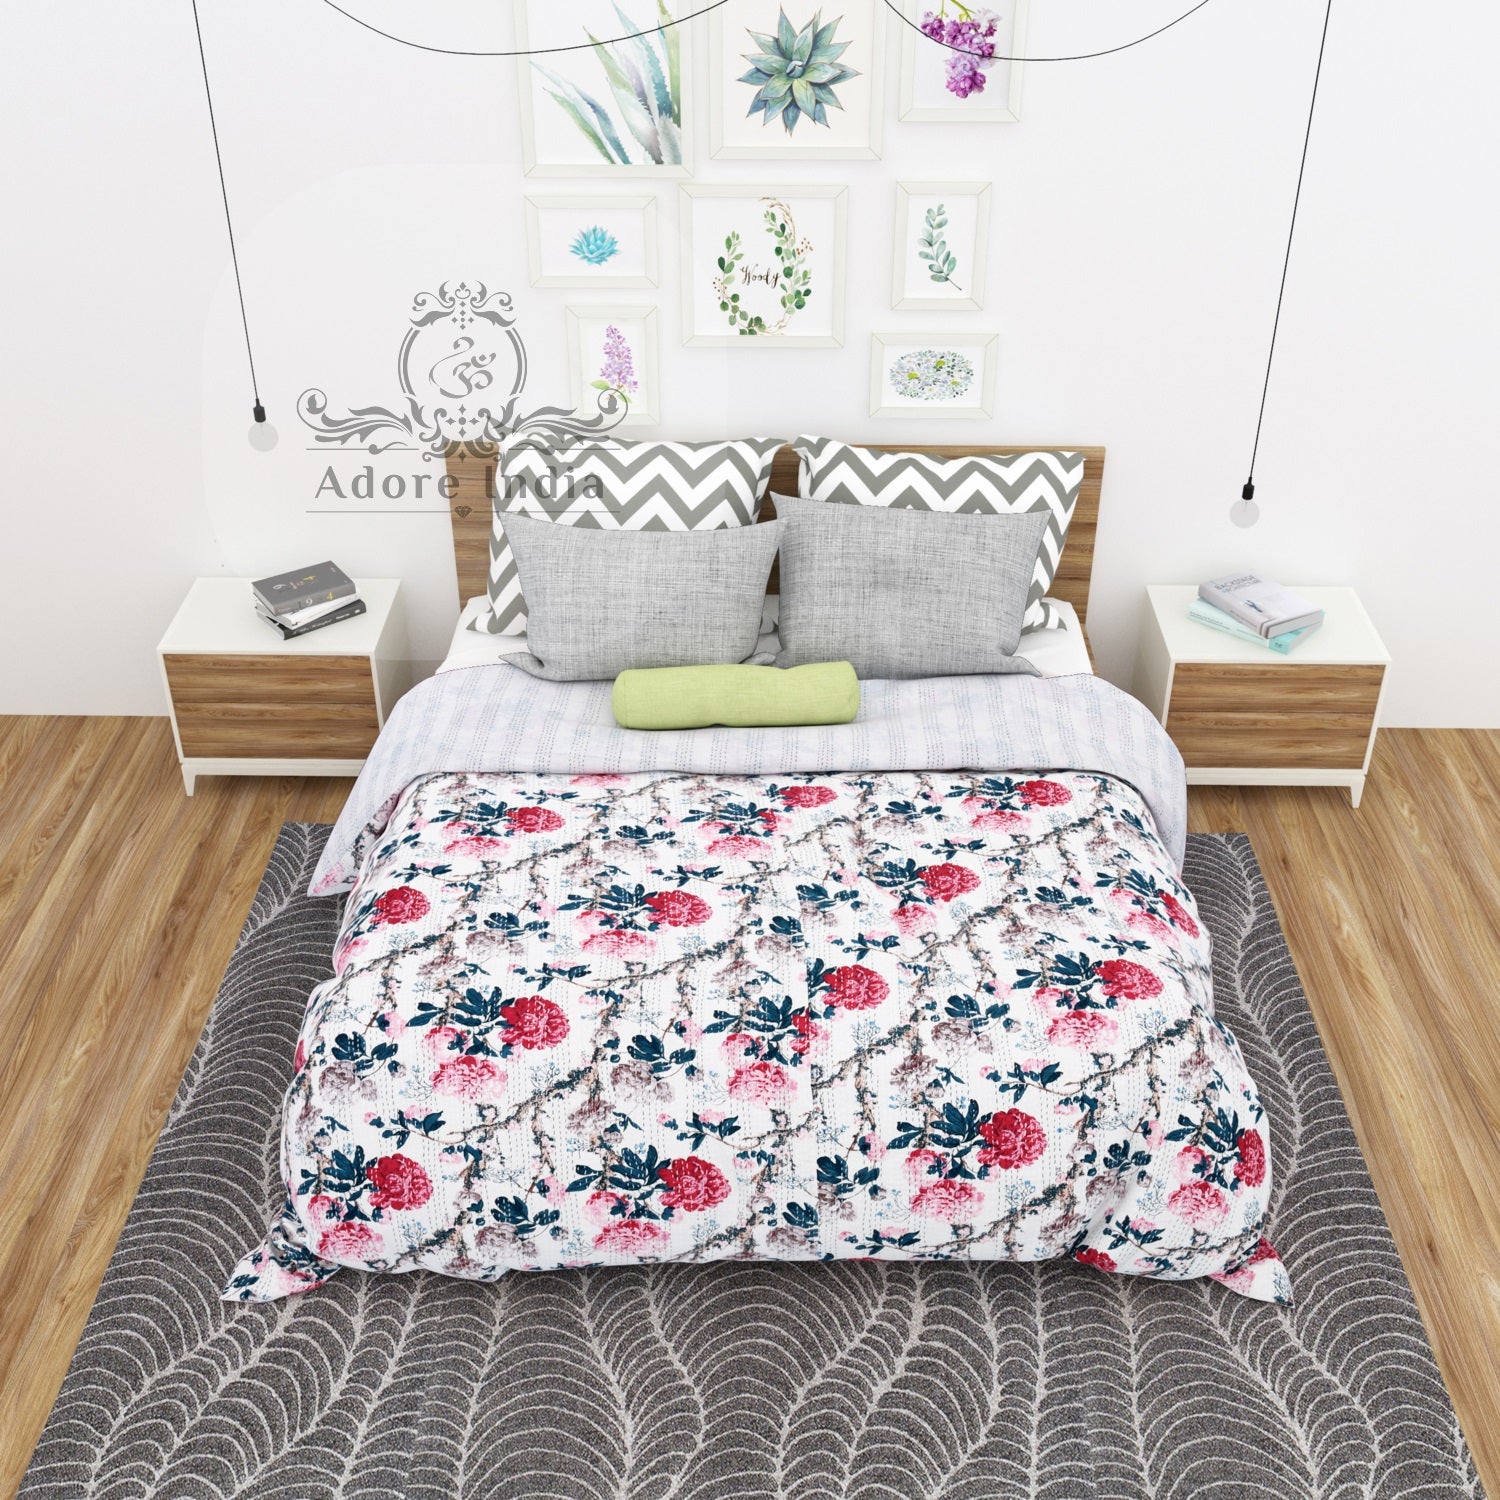 Magical Flower Printed Cotton Kantha Quilt Bedspread Throw